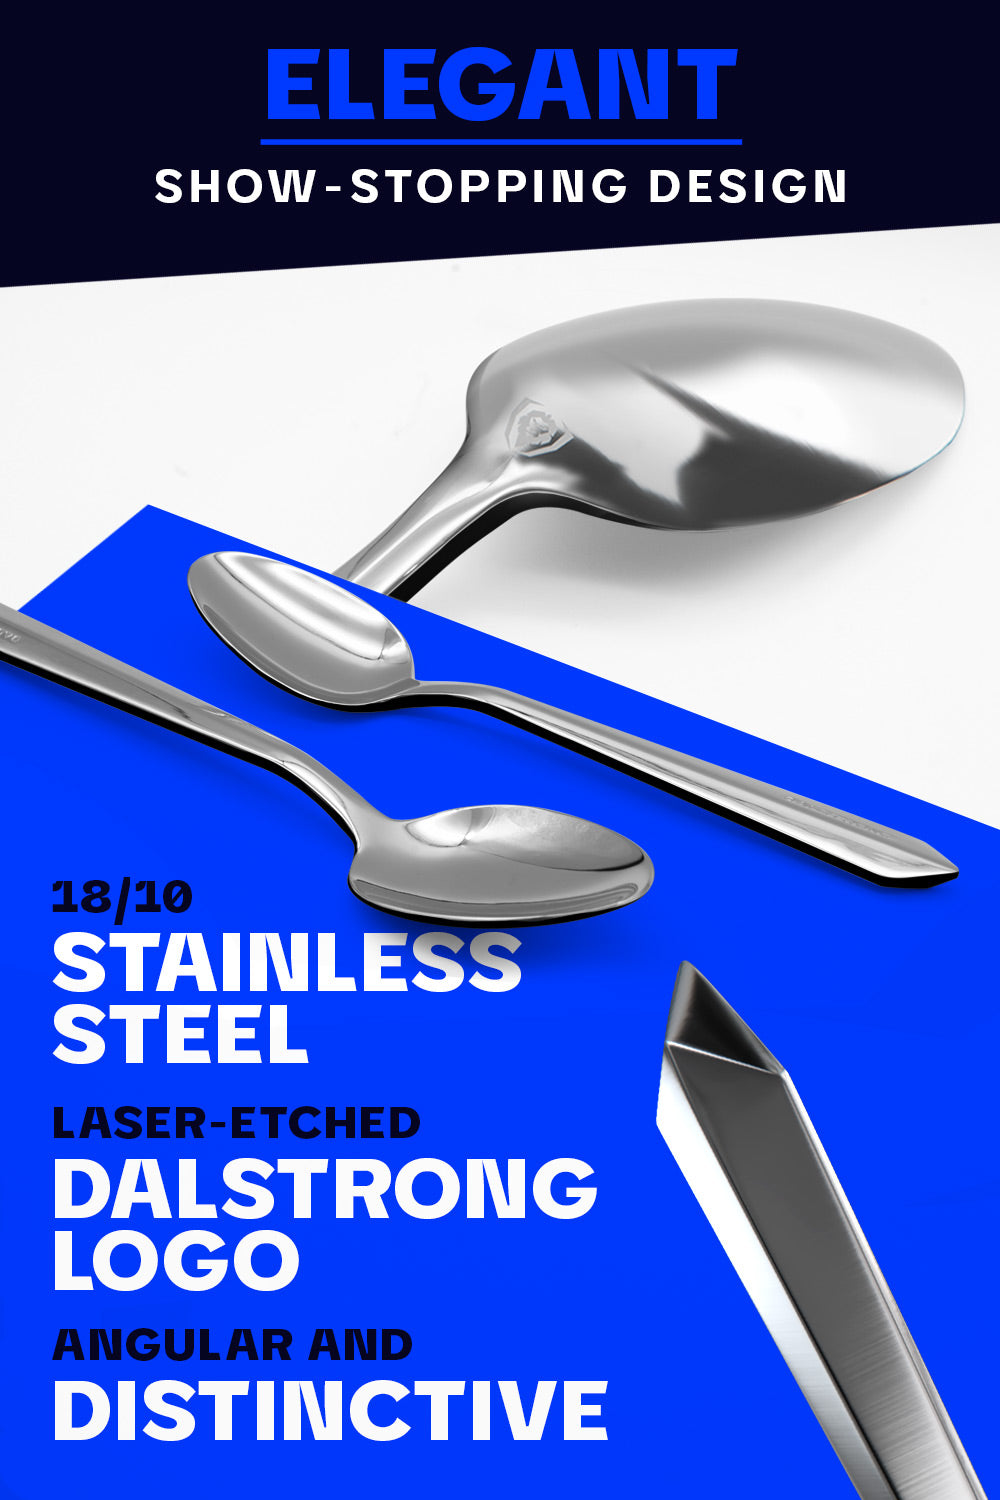 Dalstrong 20 piece flatware cutlery set silver stainless steel service for 4 showcasing it's elegant and show stopping design.